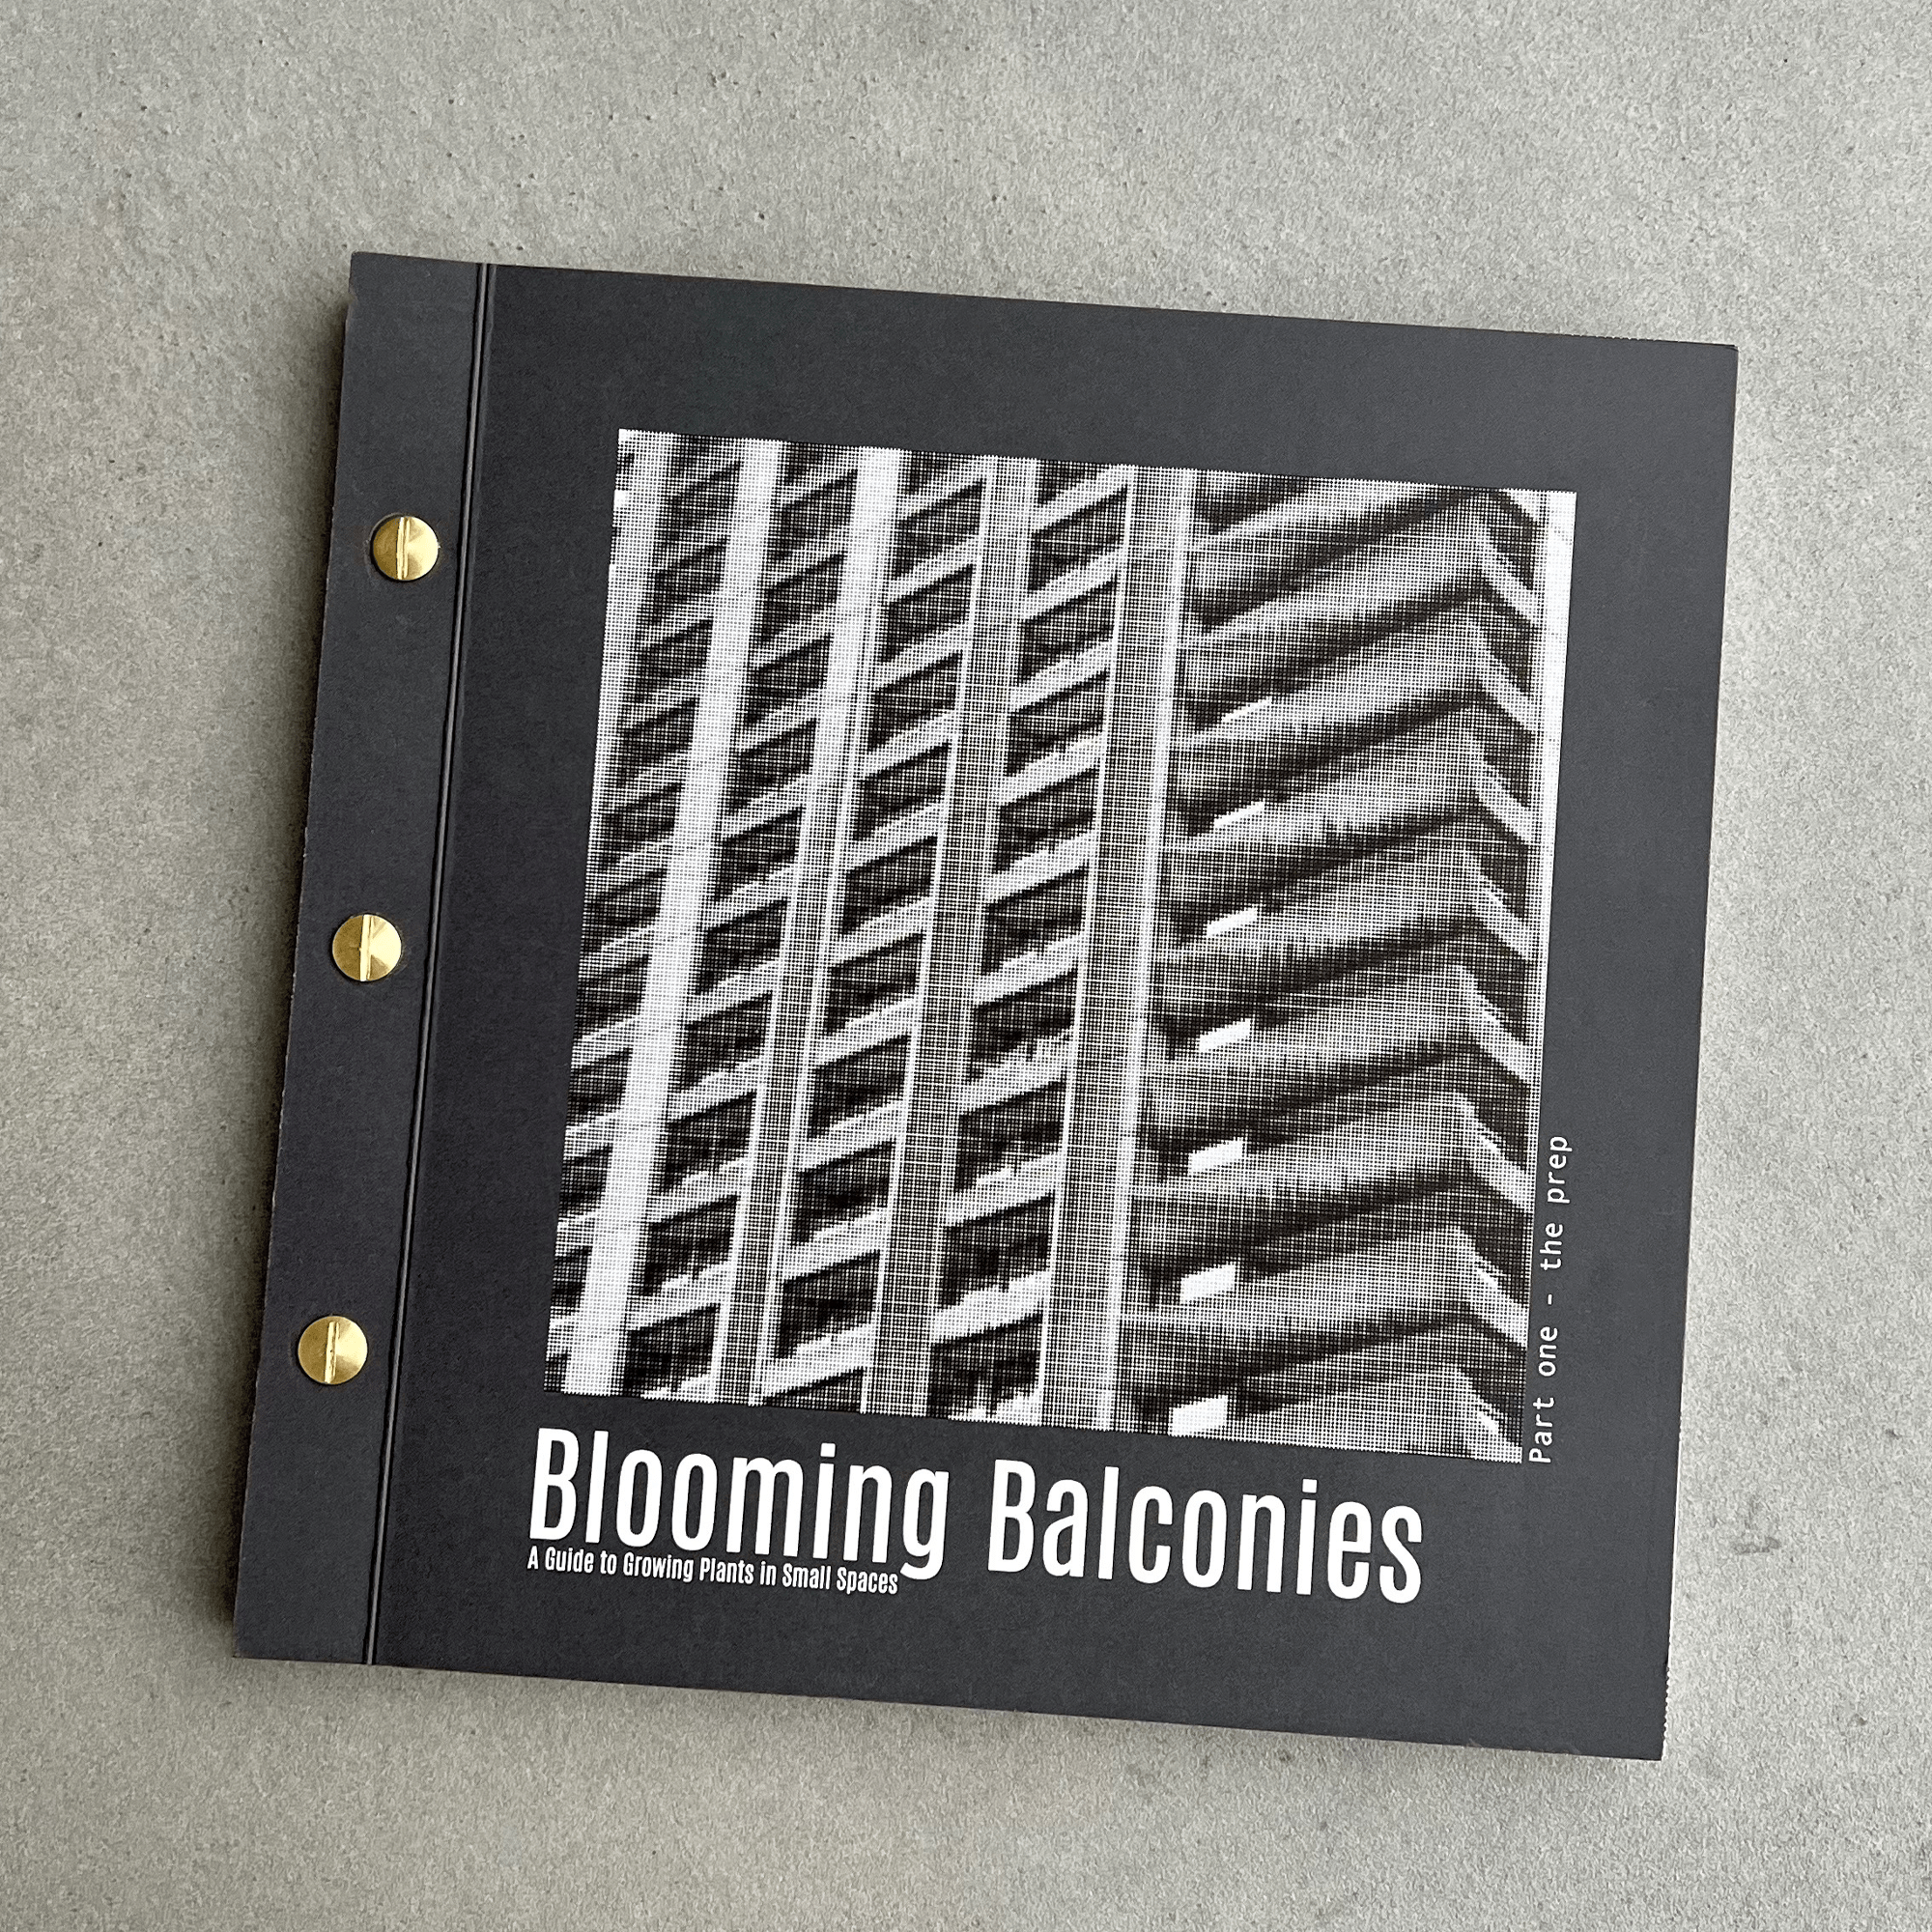 A closed book with the front of the book showing a tower block with the wording "Blooming Balconies".